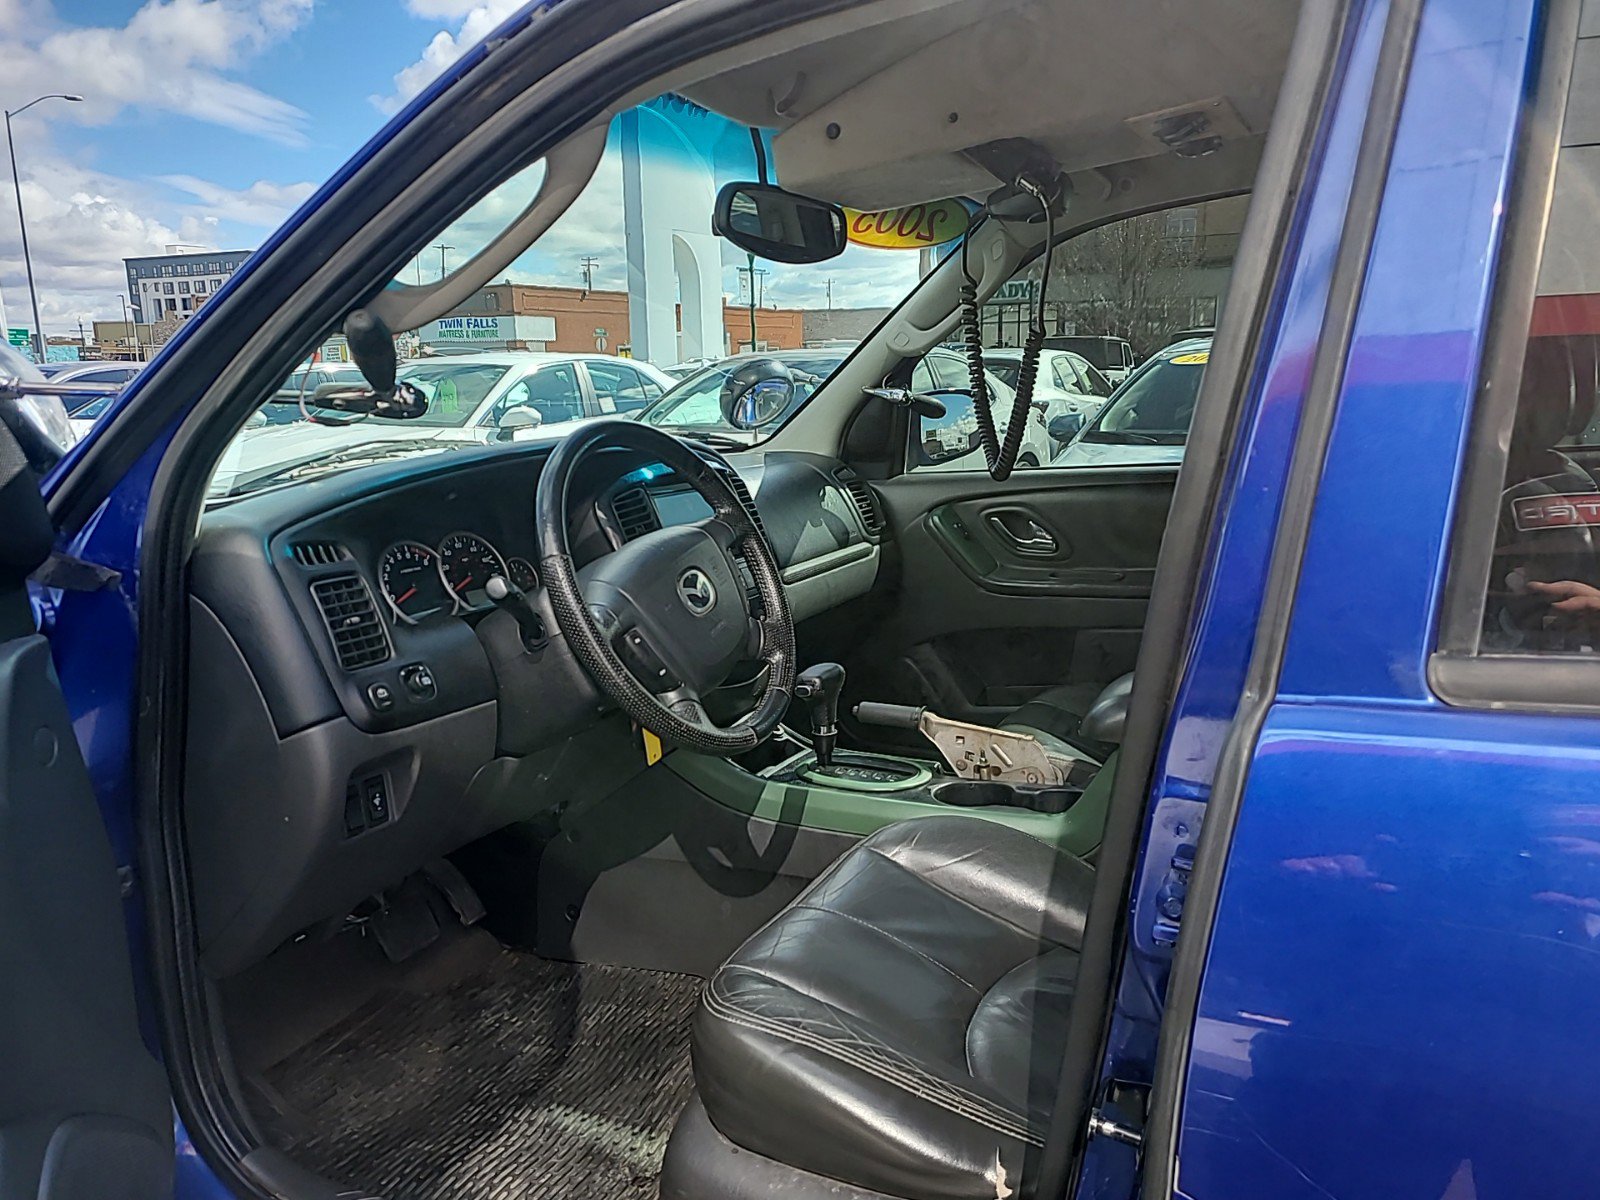 Used 2005 Mazda Tribute s with VIN 4F2YZ96135KM31621 for sale in Twin Falls, ID